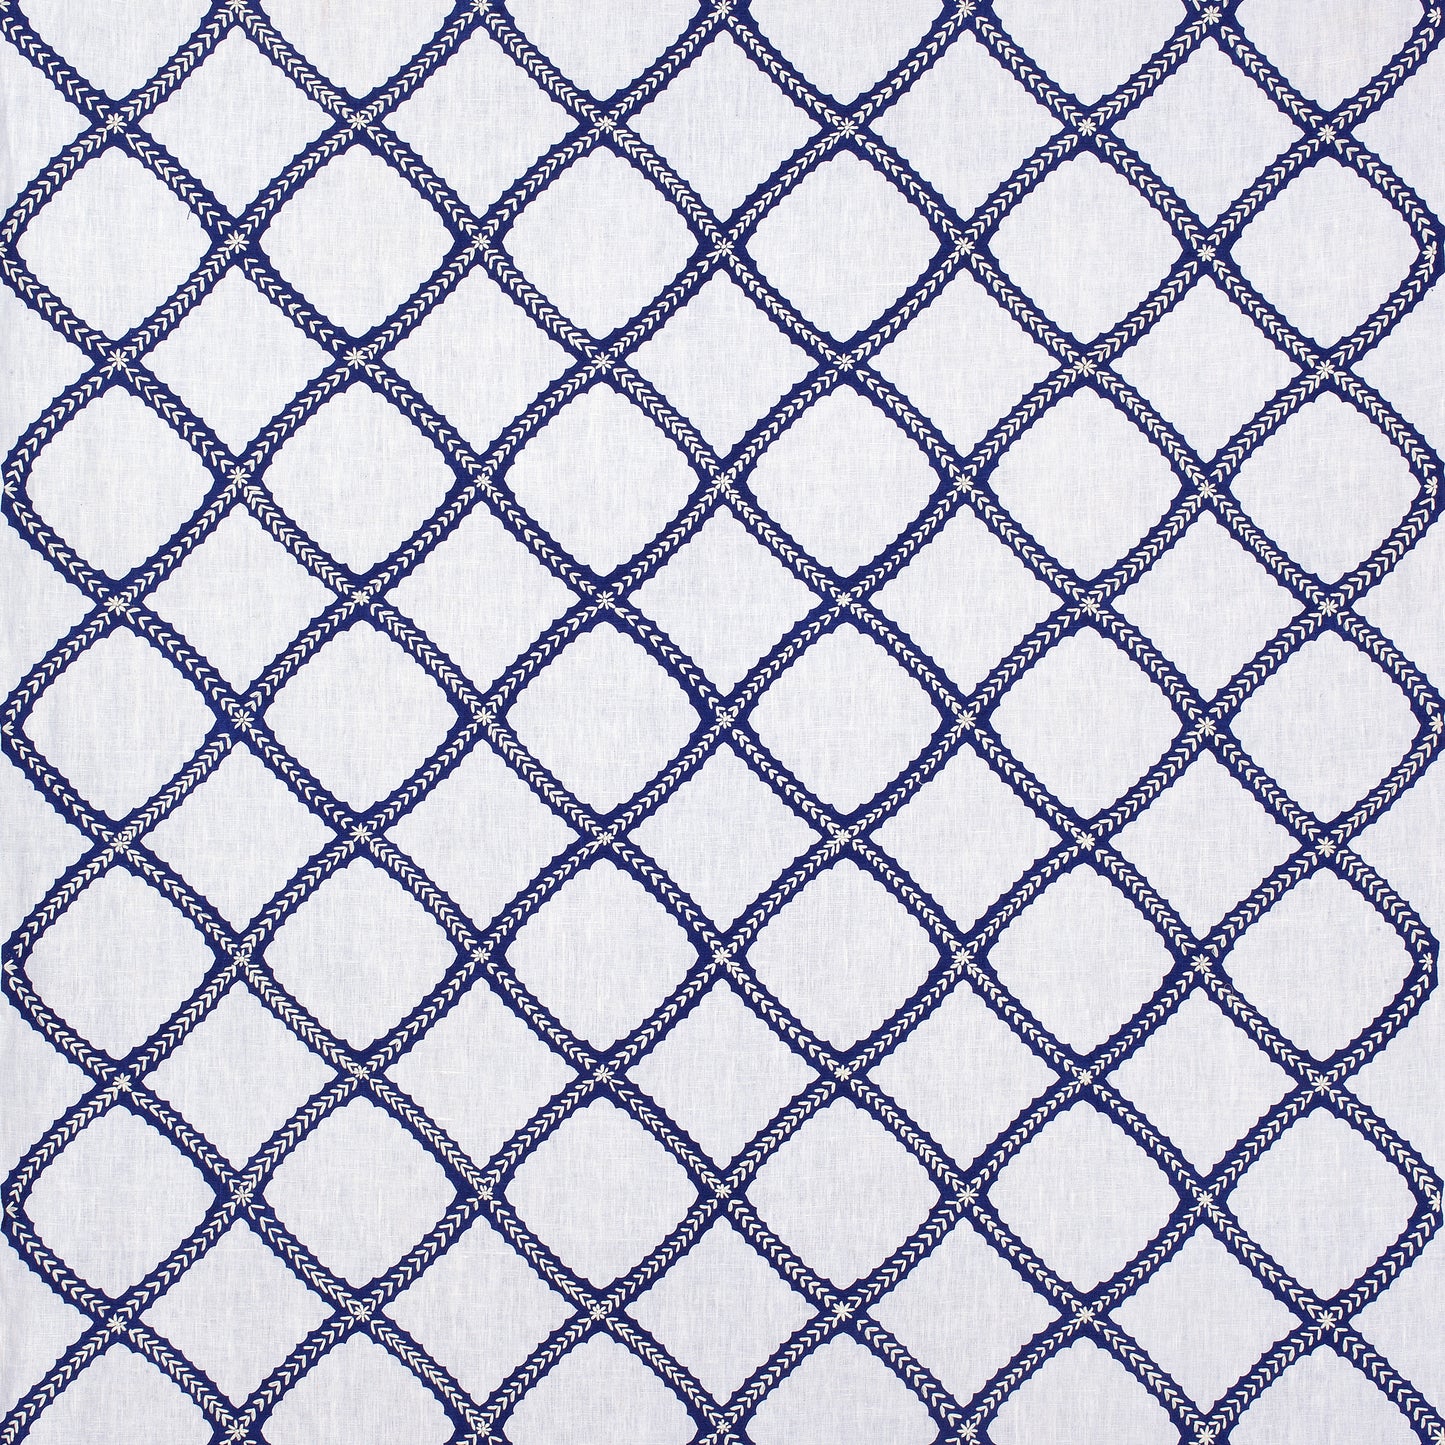 Purchase Thibaut Fabric Pattern# W788706 pattern name Majuli Embroidery color Navy on White